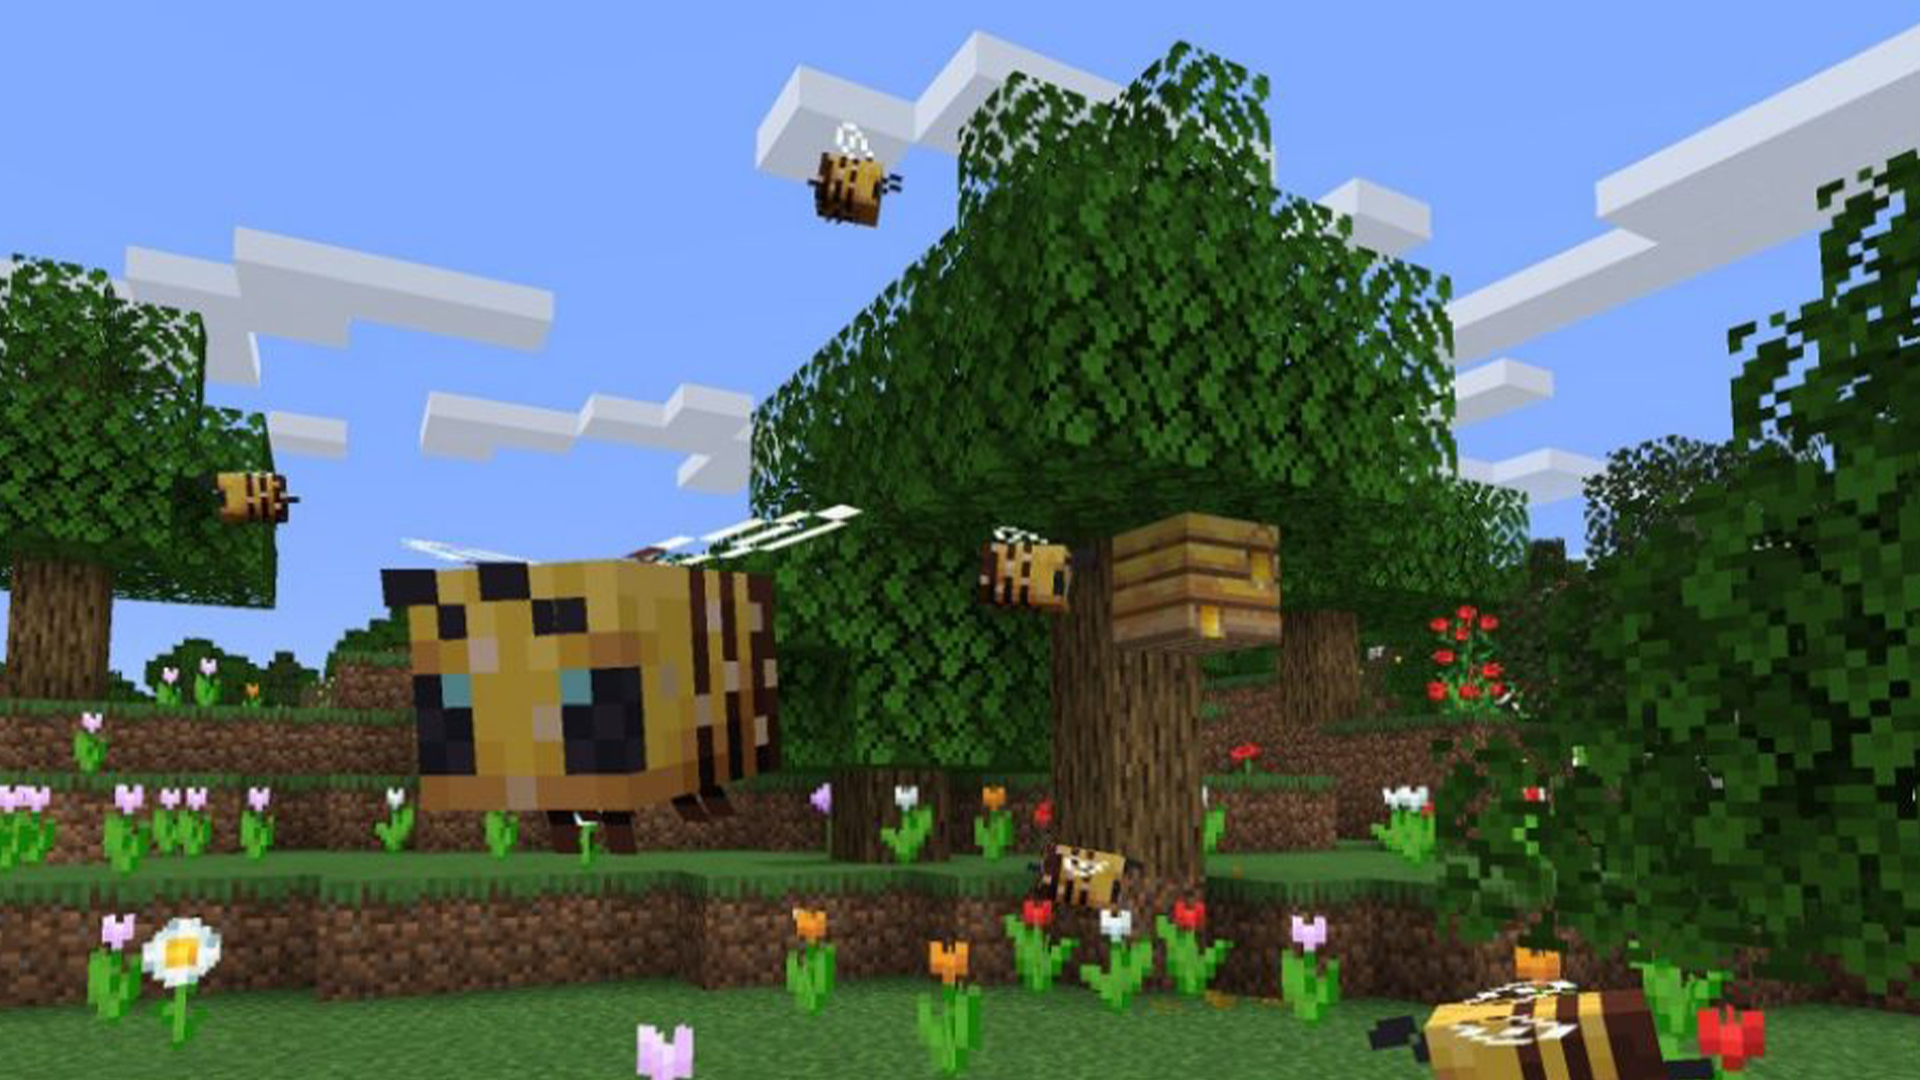 Minecraft 1.18.1 saves the bees